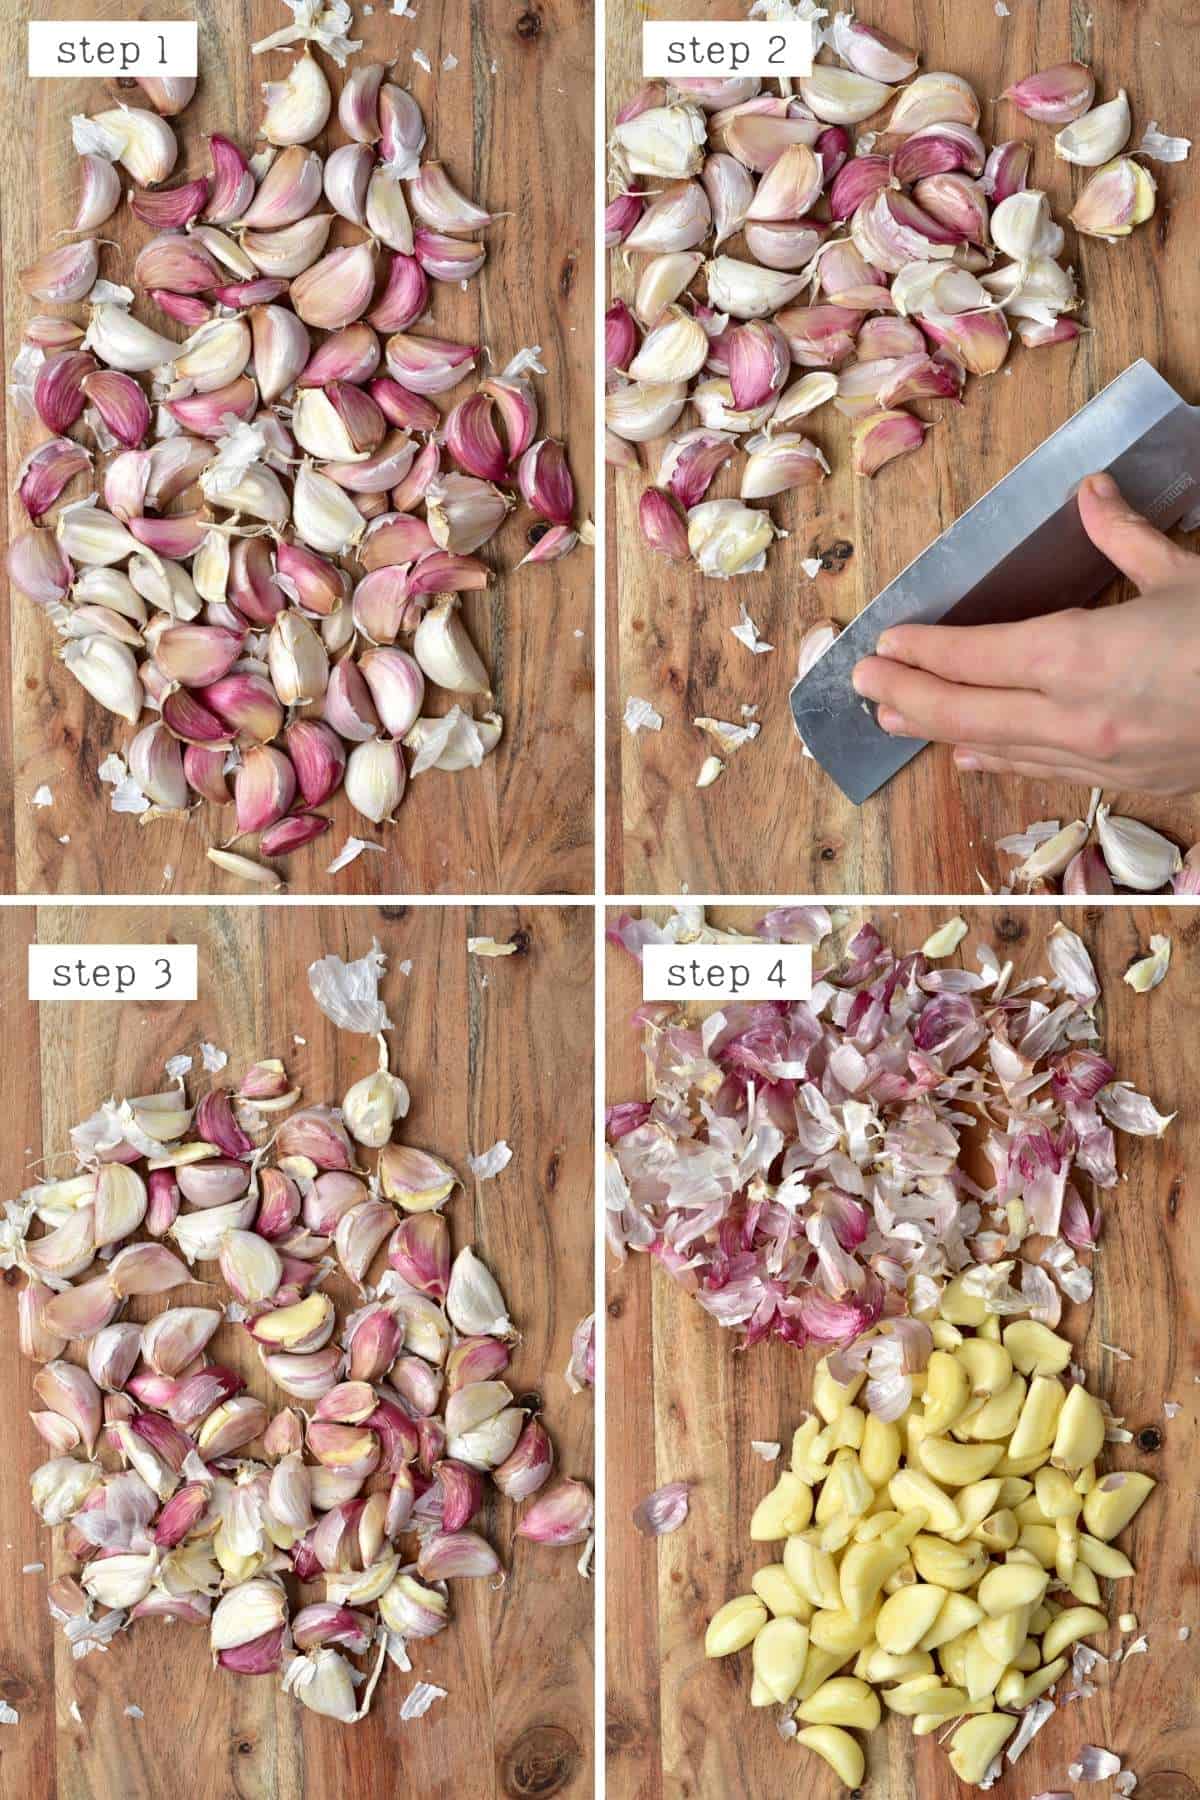 How to peel garlic - Method 1 with a knife